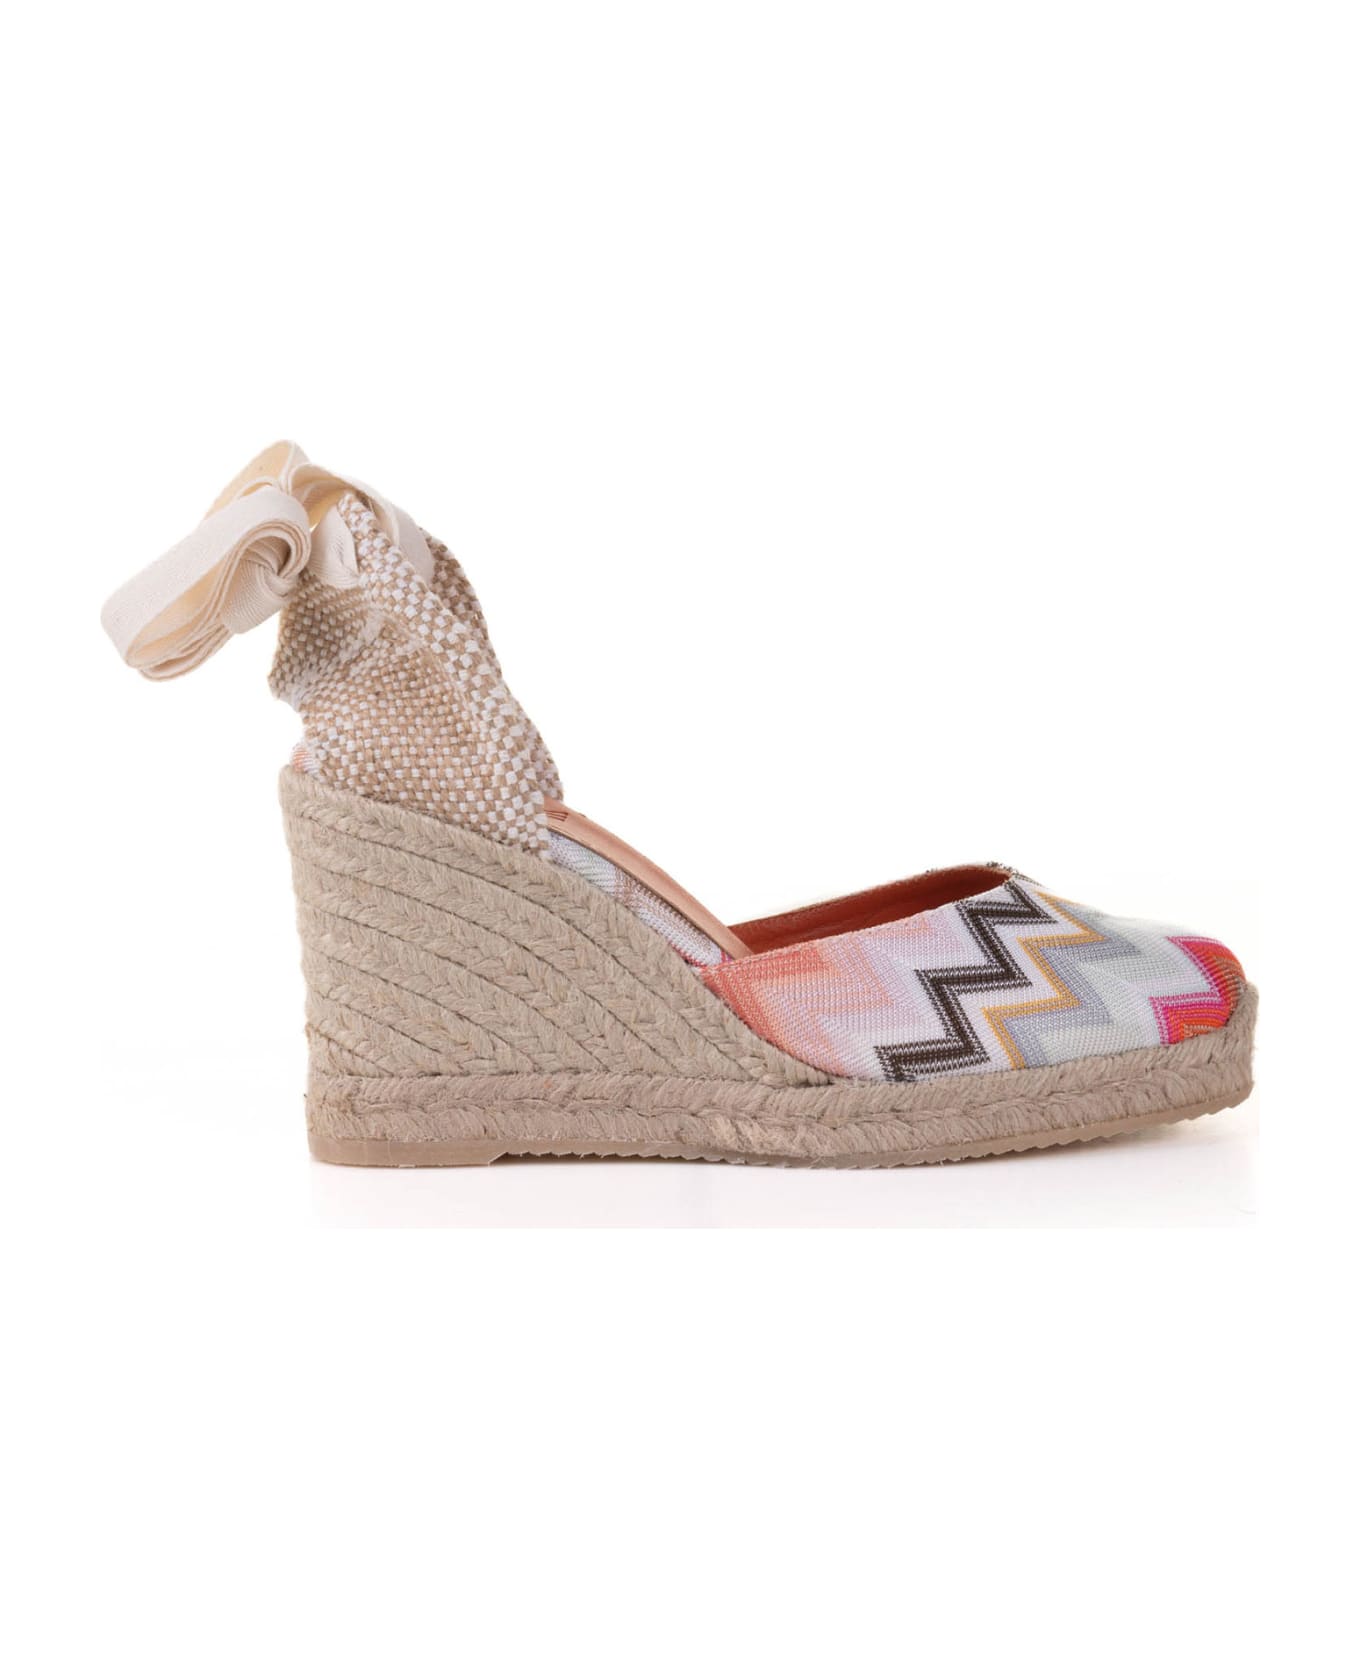 Missoni Espadrilles In Chevron Fabric With Wedge And Ankle Laces - PINK サンダル